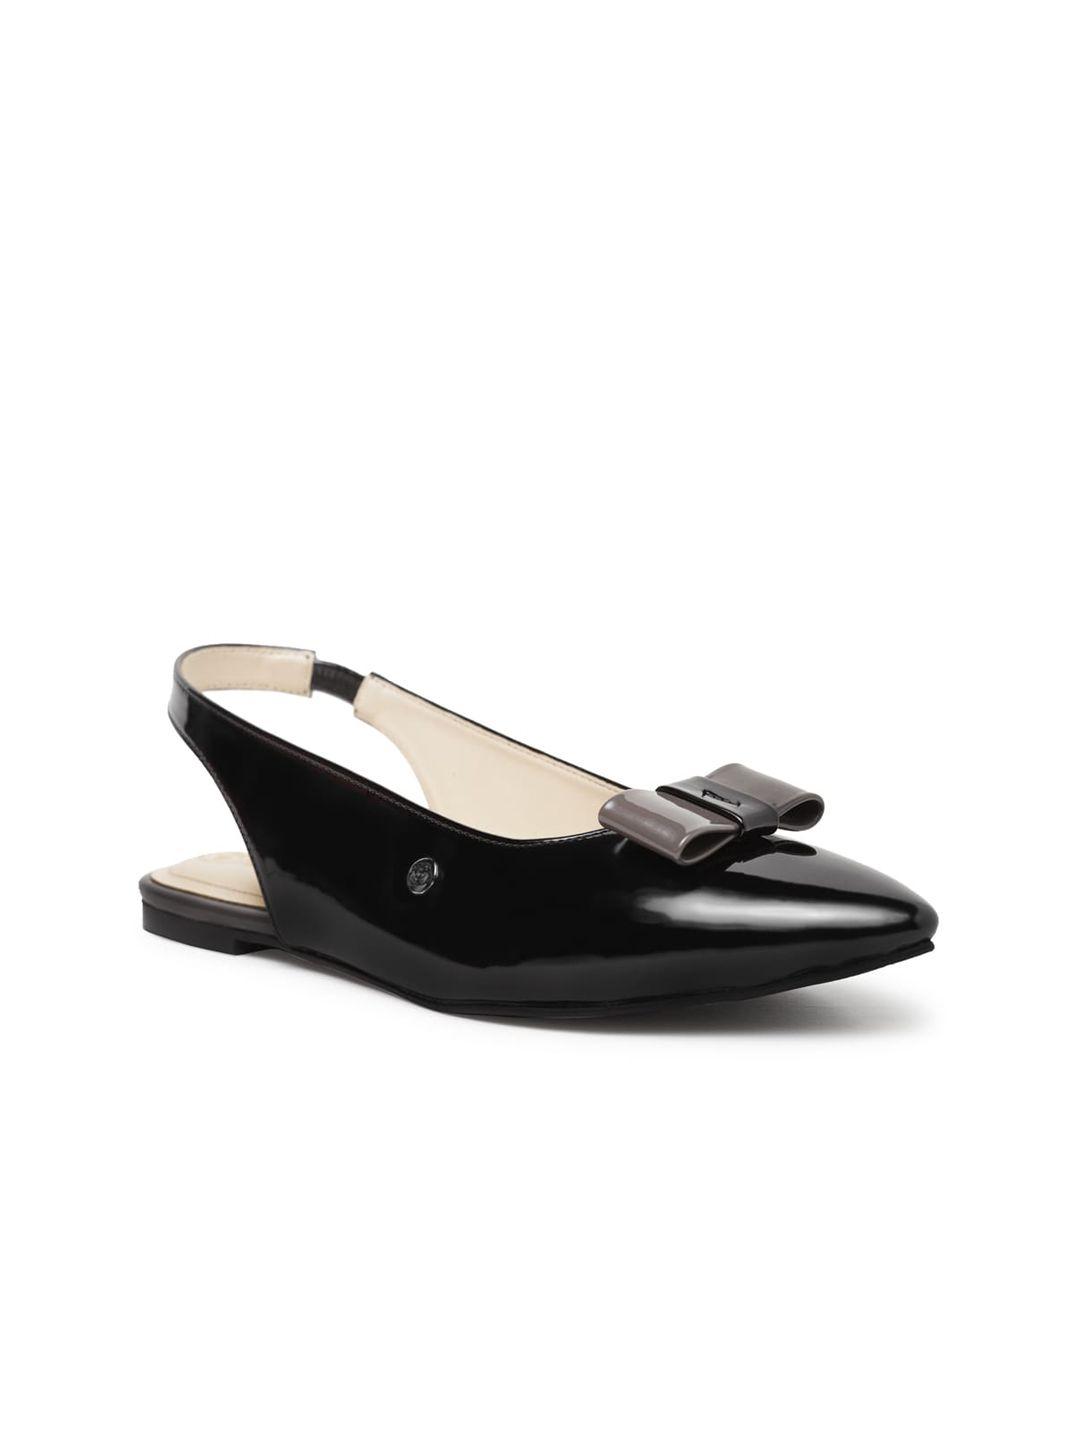 beaver women mules with bows flats